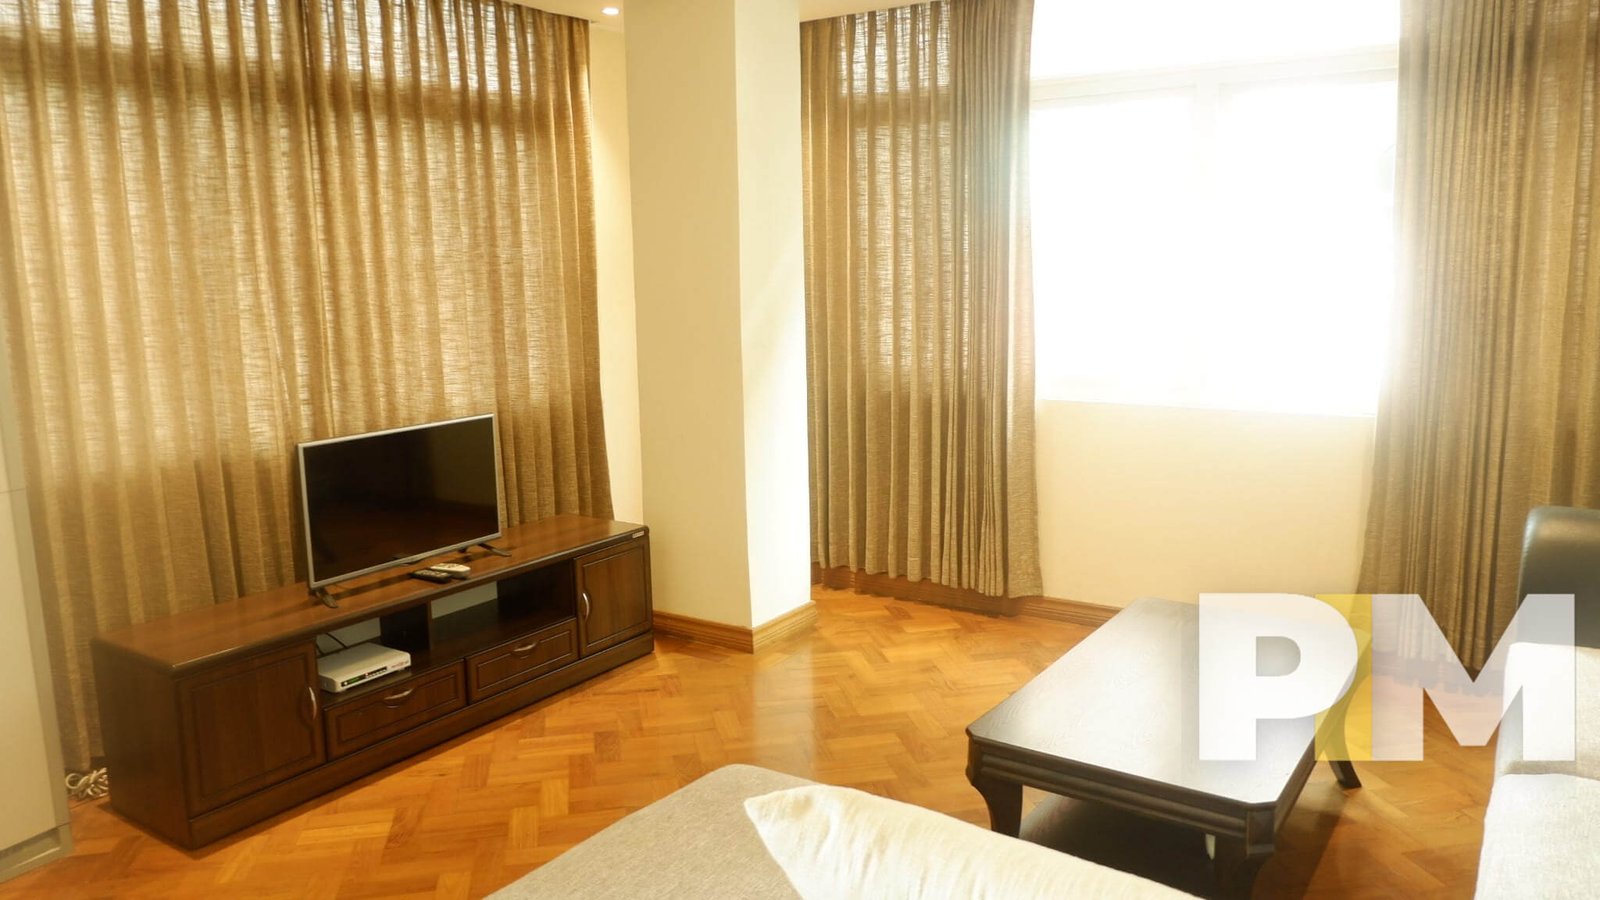 living room with TV - Condo for rent in Kyimyindine